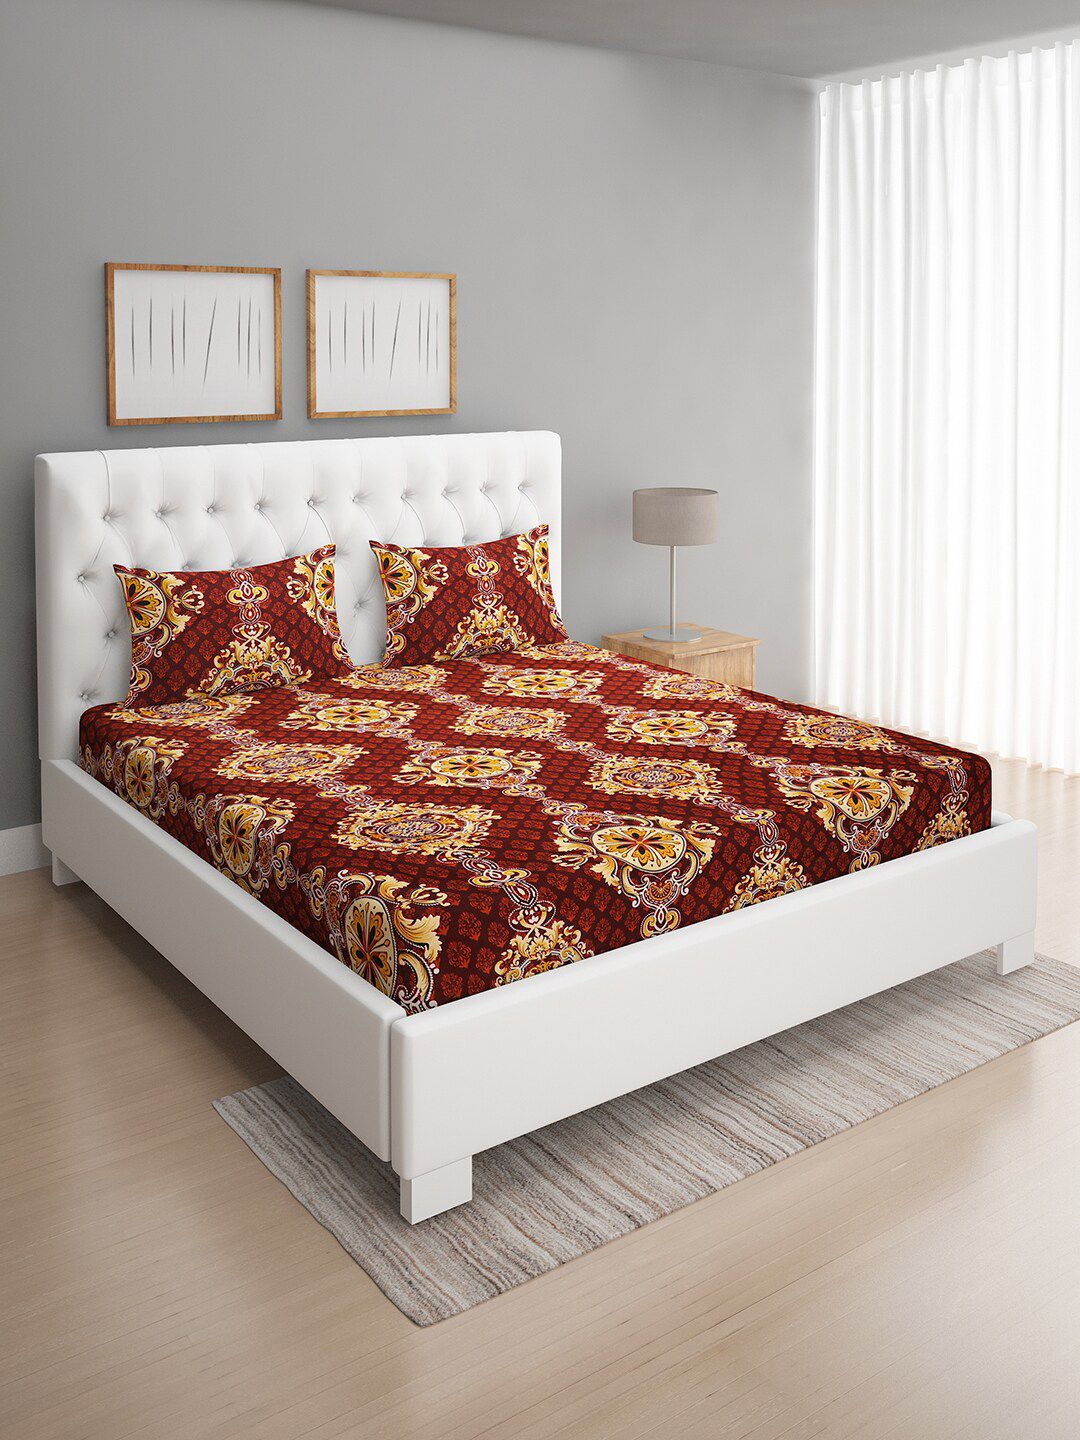 ROMEE Maroon & Yellow Ethnic Motifs 144 TC Cotton Queen Bedsheet with 2 Pillow Covers Price in India